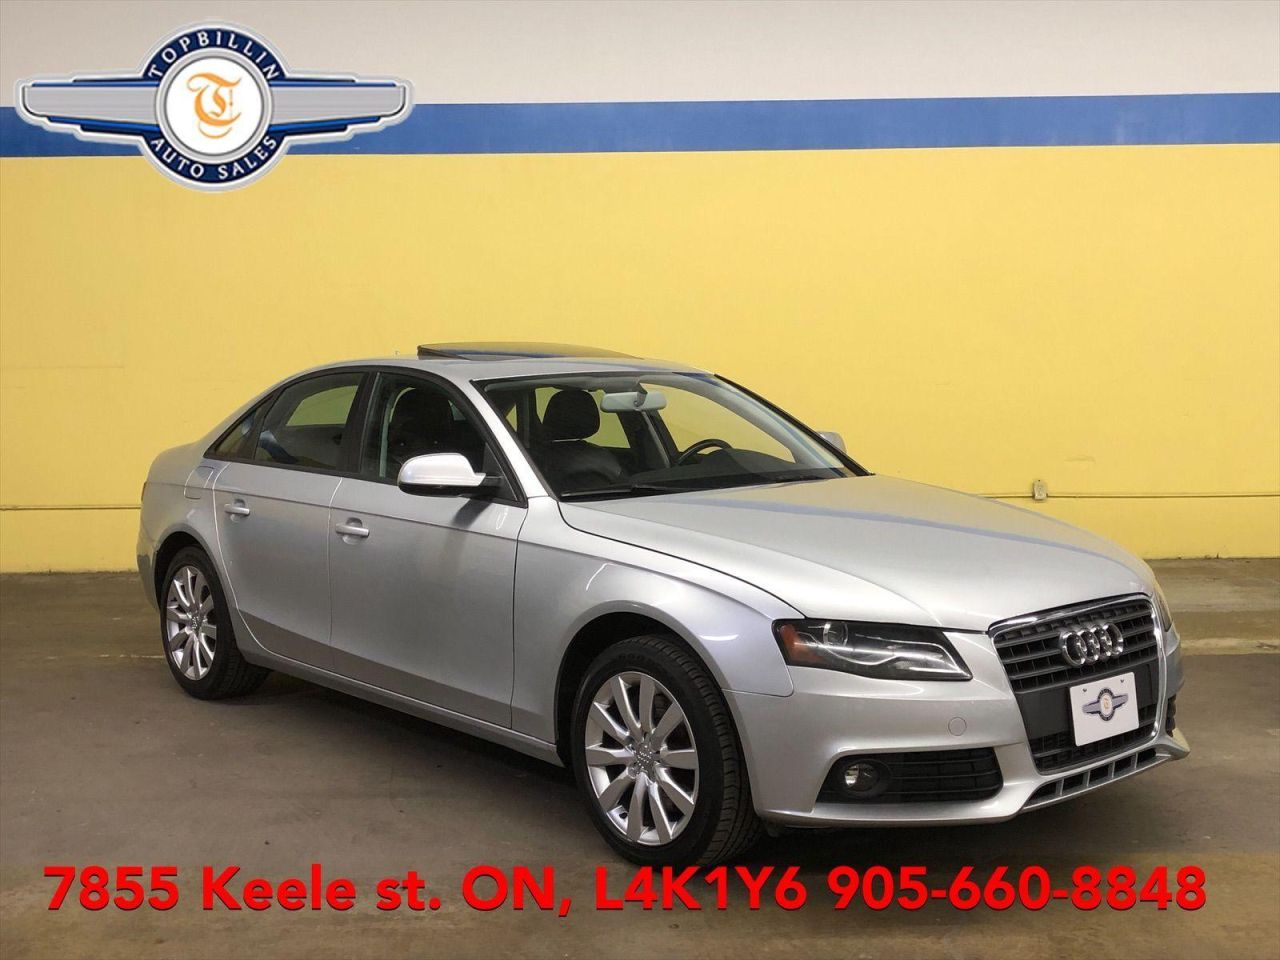 2010 Audi A4 2.0T, Leather, Roof, 2 Years Warranty